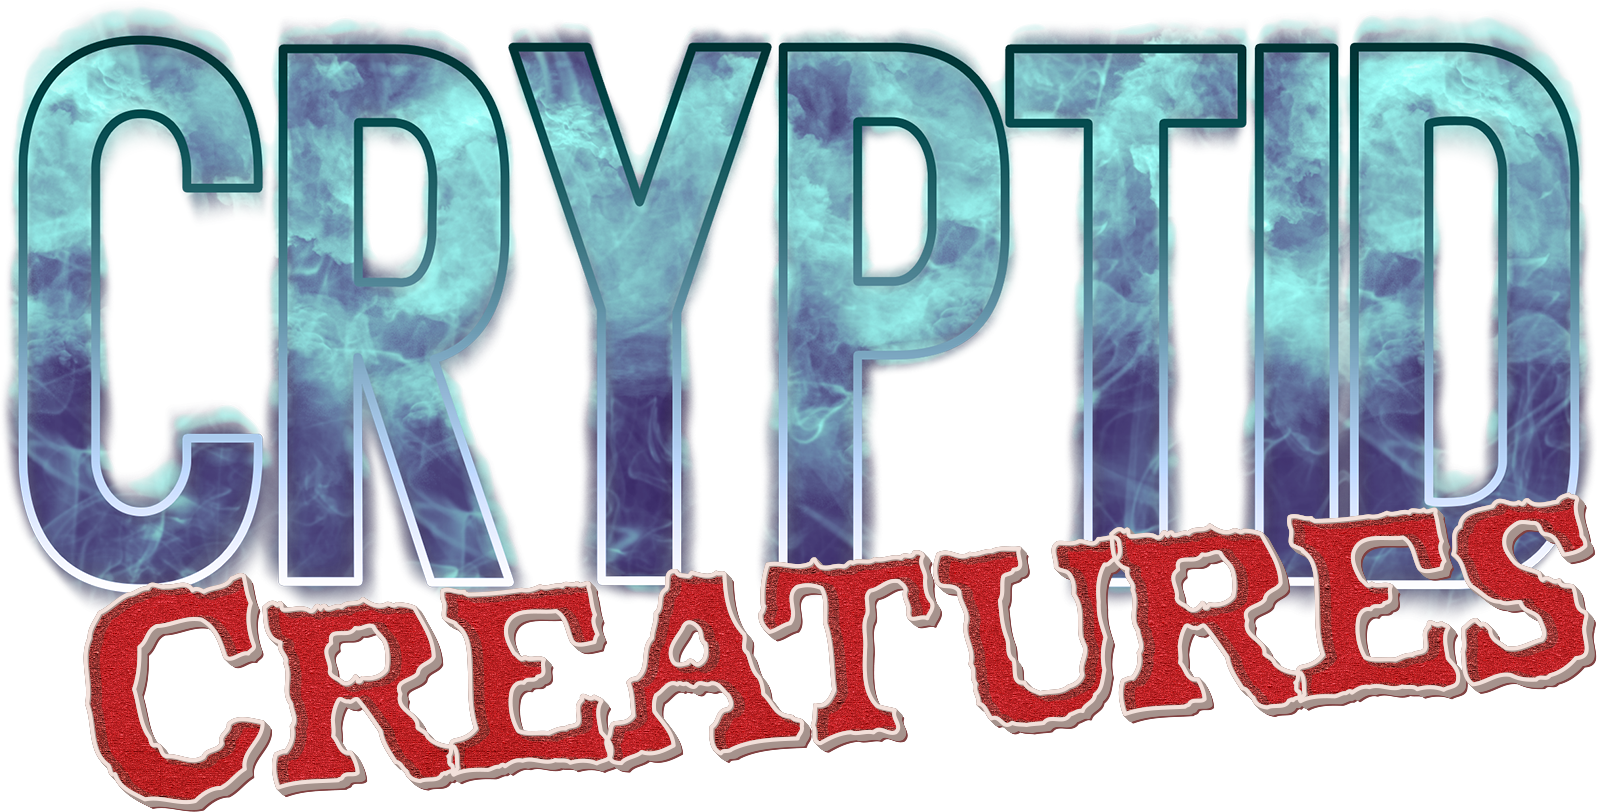 Cryptid Creatures EP. 101: Encounters with the Yowie!